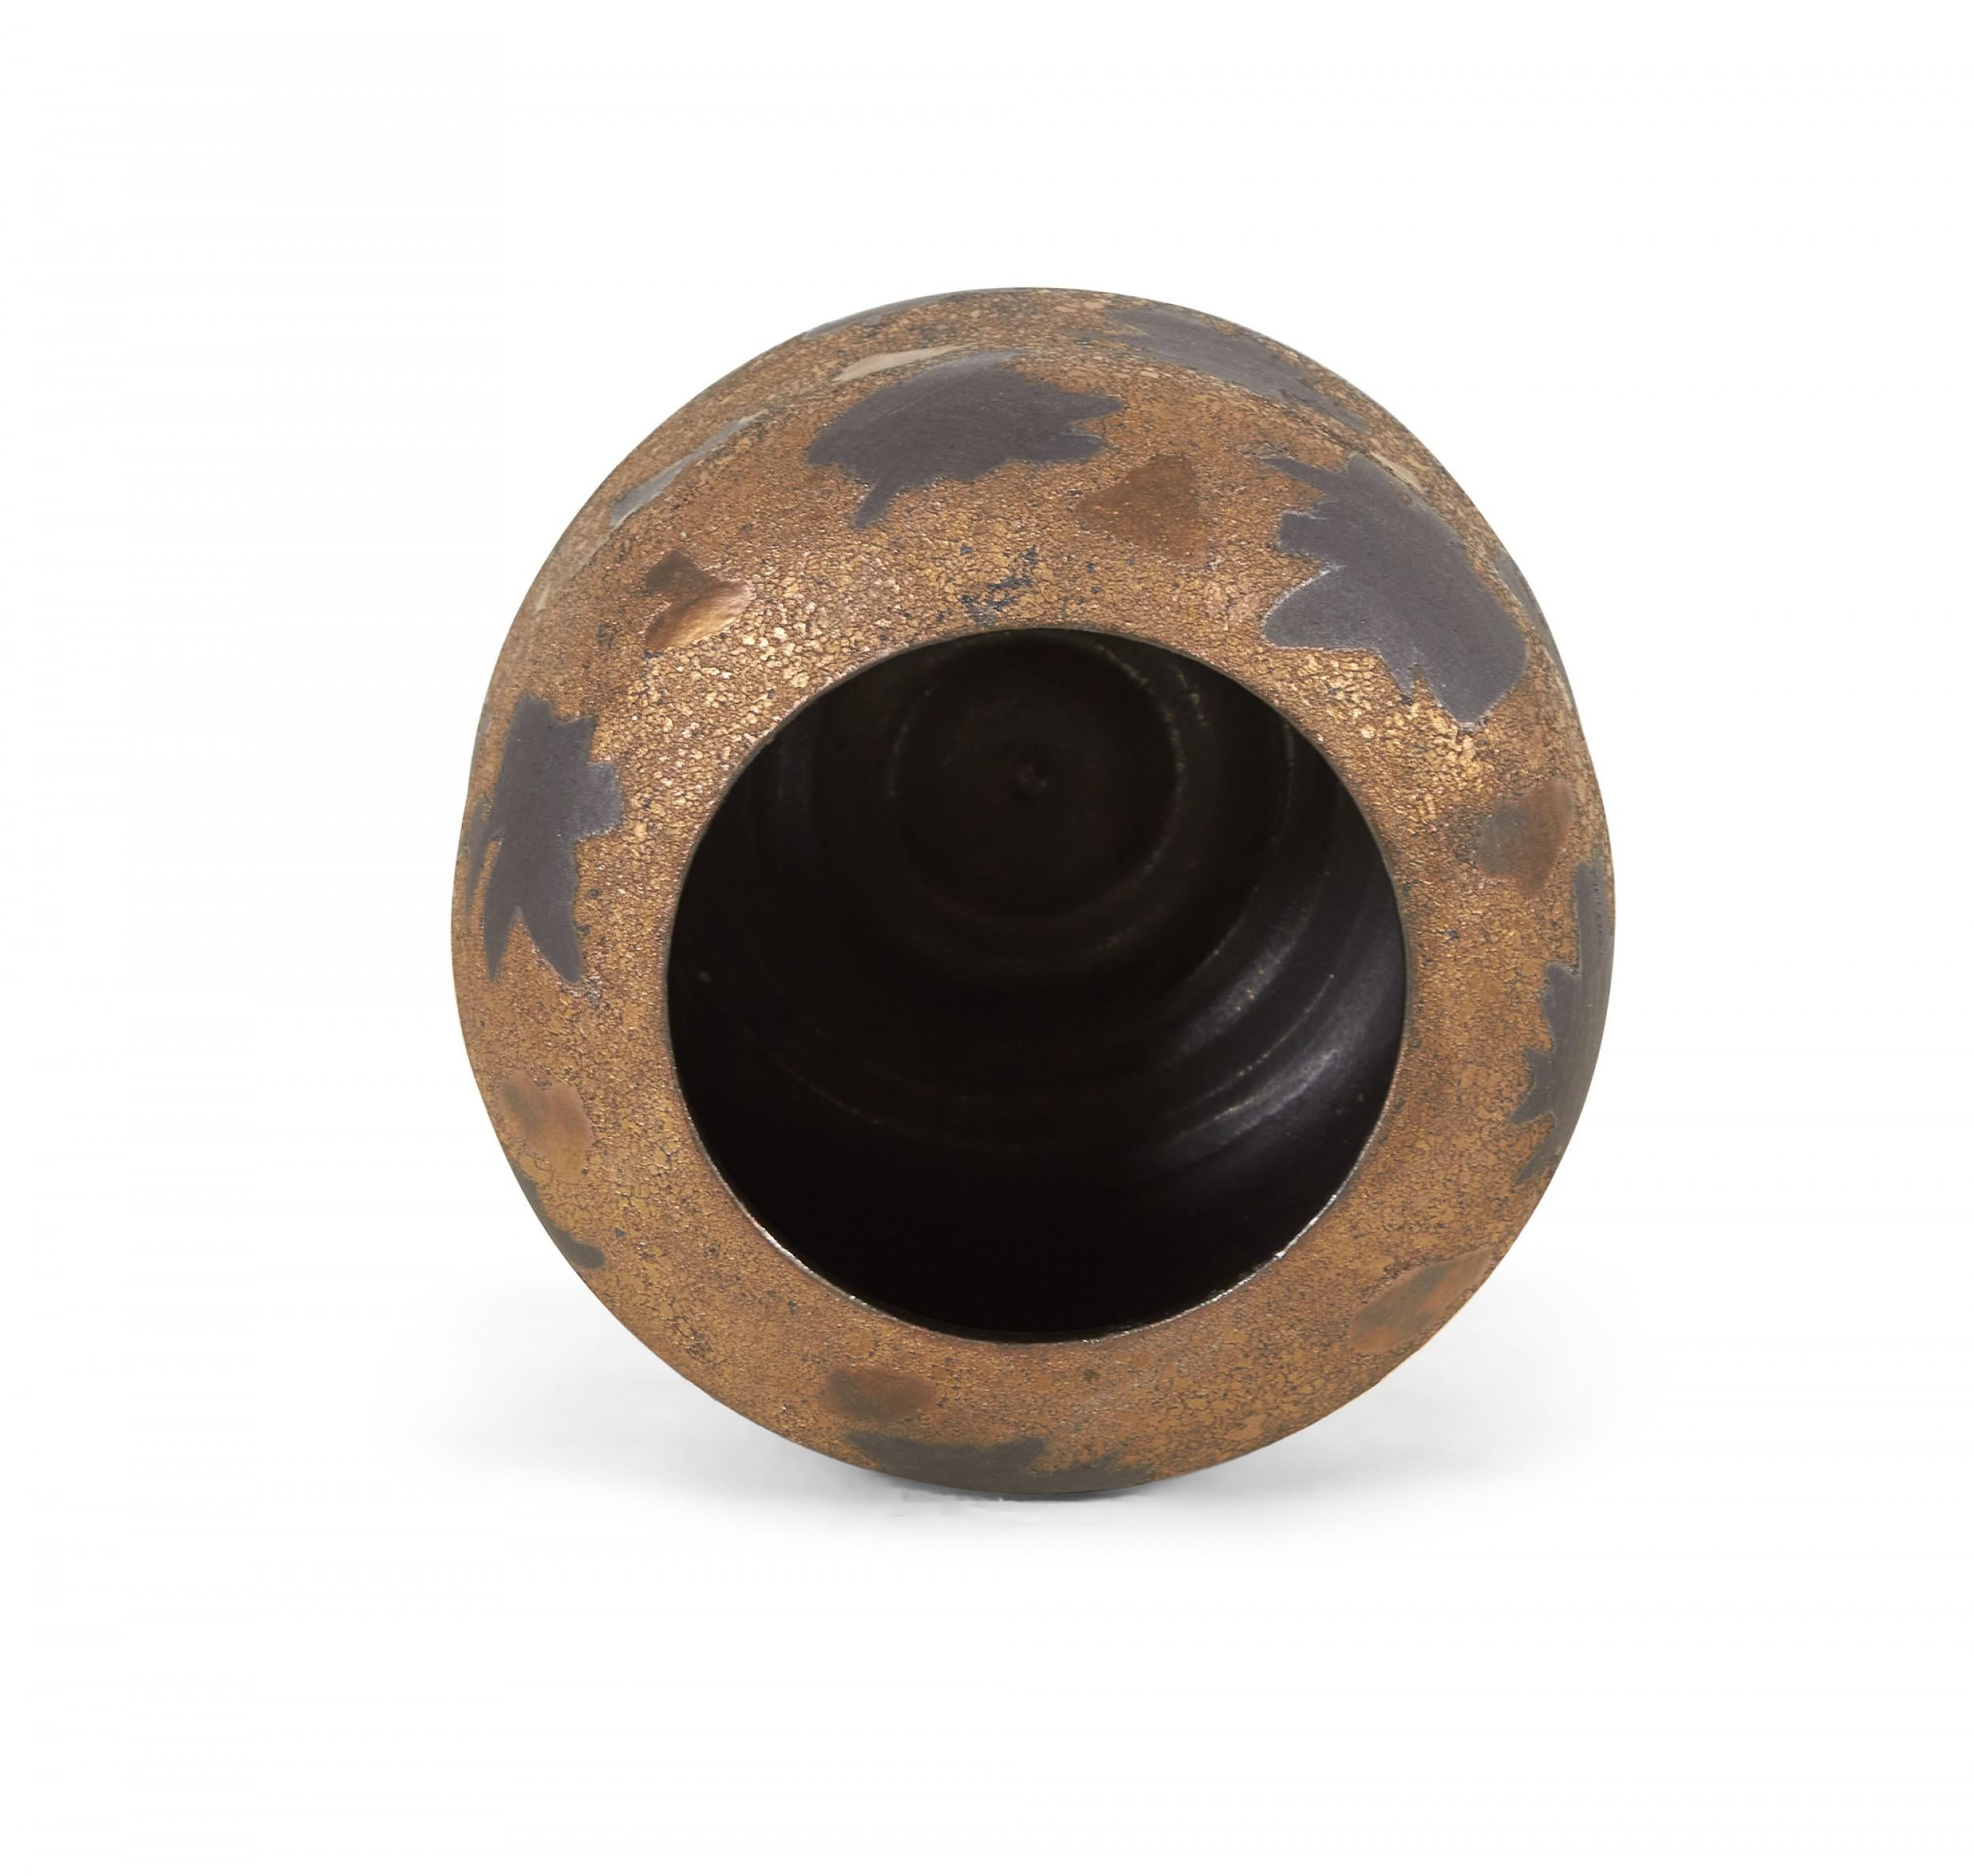 Ceramic Gary DiPasquale Contemporary Bronze Texture and Black Starburst Patterned Curved For Sale